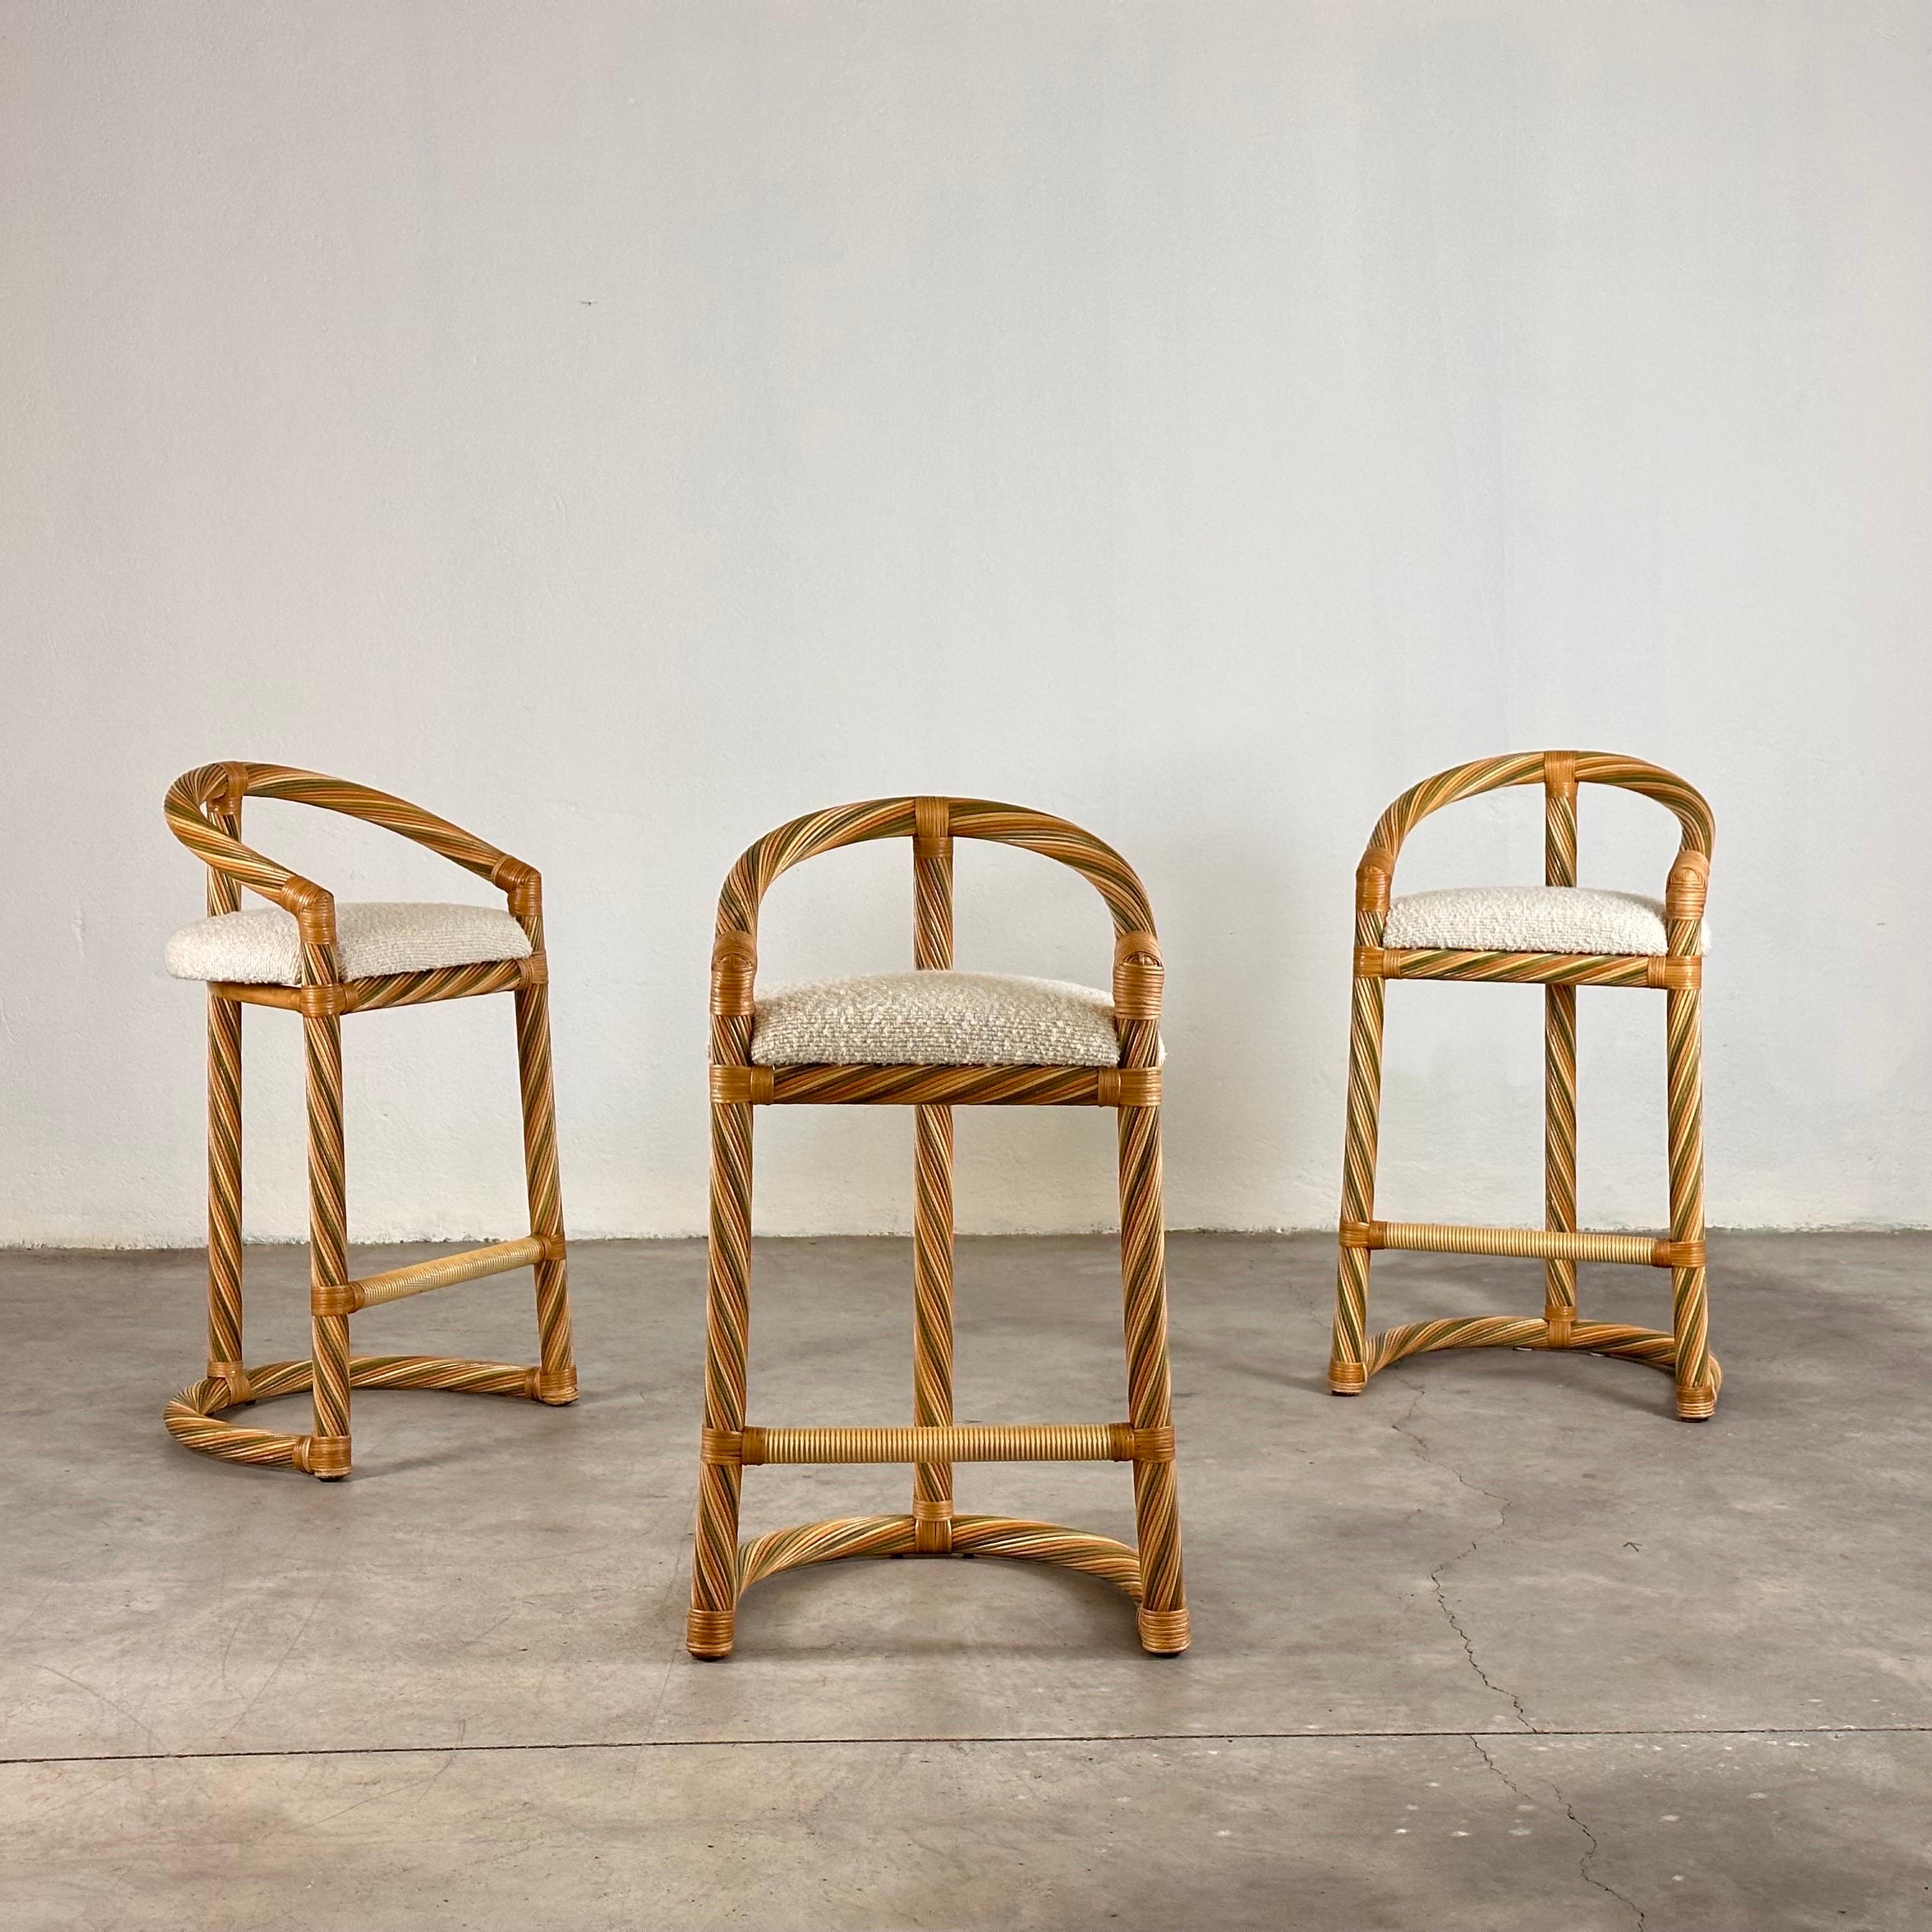 Alberto Smania, an Italian designer known for his innovative approach to furniture design, founded Studio Interni Smania with a vision to create timeless pieces that combine style and functionality.

Crafted from durable wicker, these stools boast a